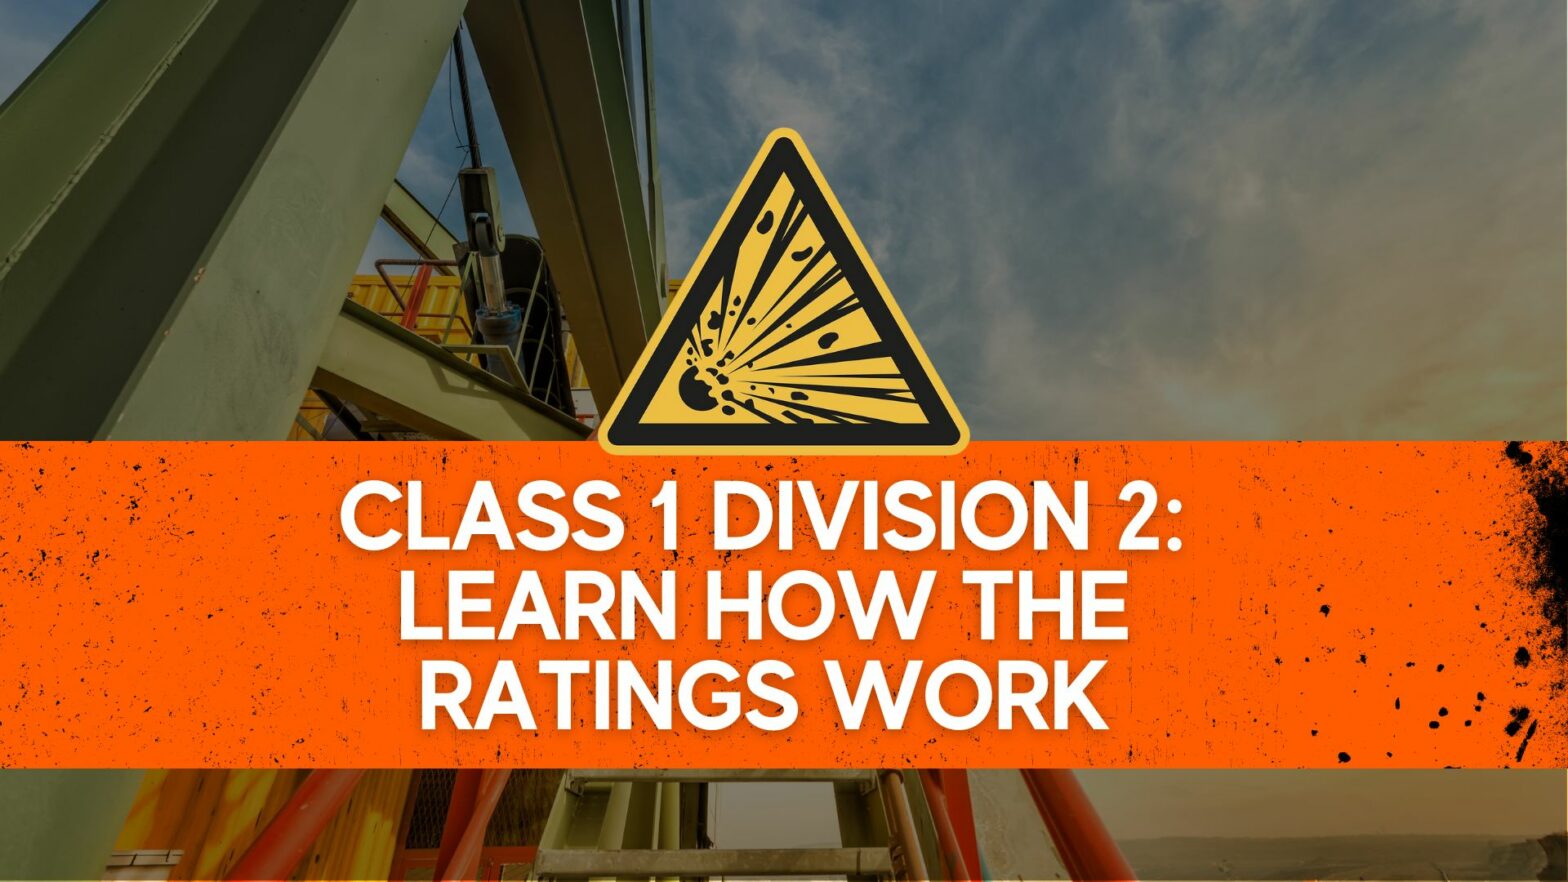 Class 1 Division 2 Learn how the ratings work